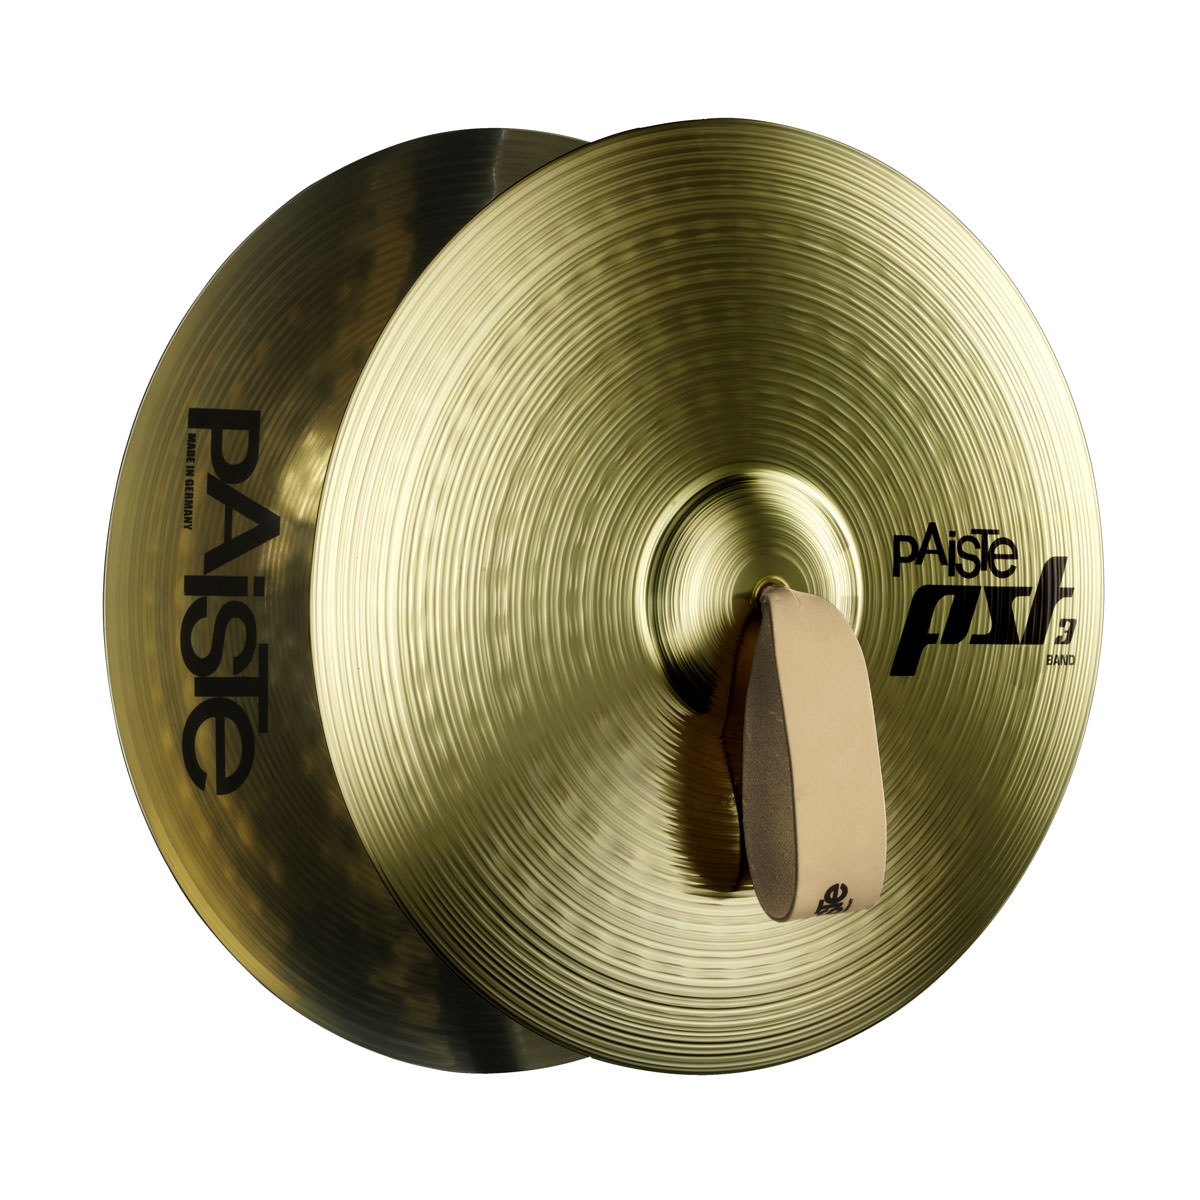 Paiste PST 3 14" Marching Band Cymbals (Pair)